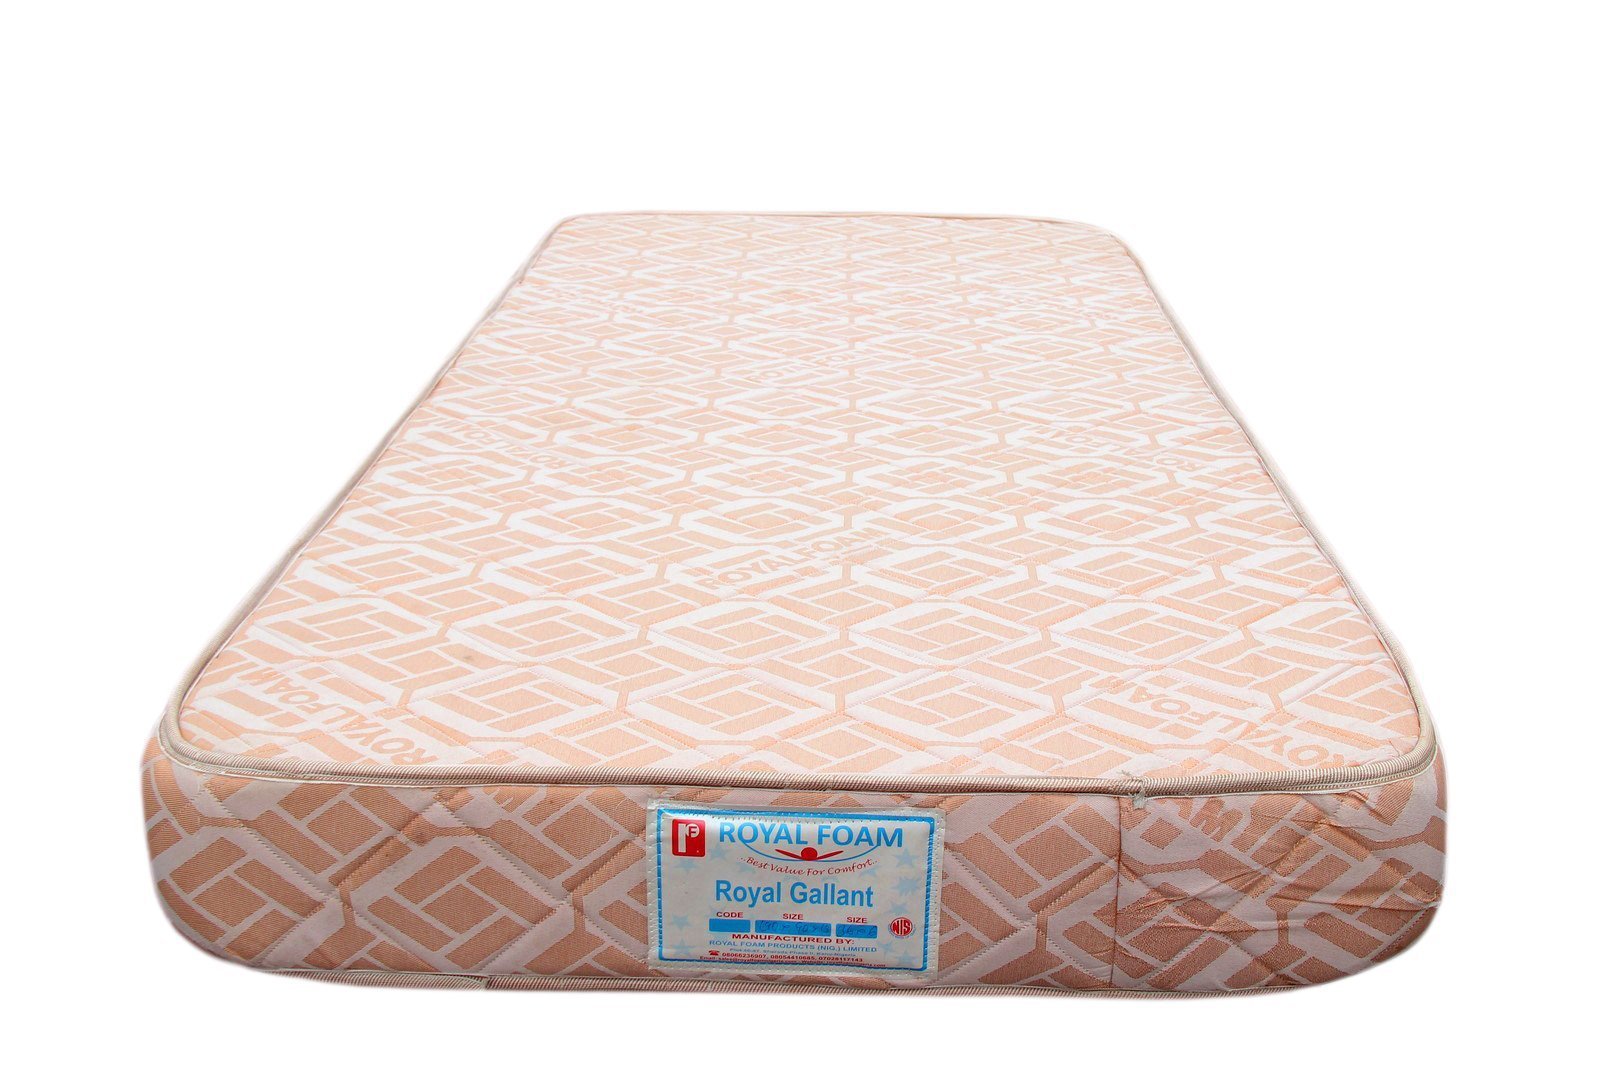 Royal Gallant Plus JACQUARD fabric-Fully Quilted Mattress 190 X 135 X 25 CM(6ft x 4.5ft x 10inches) Single(Lagos Only)